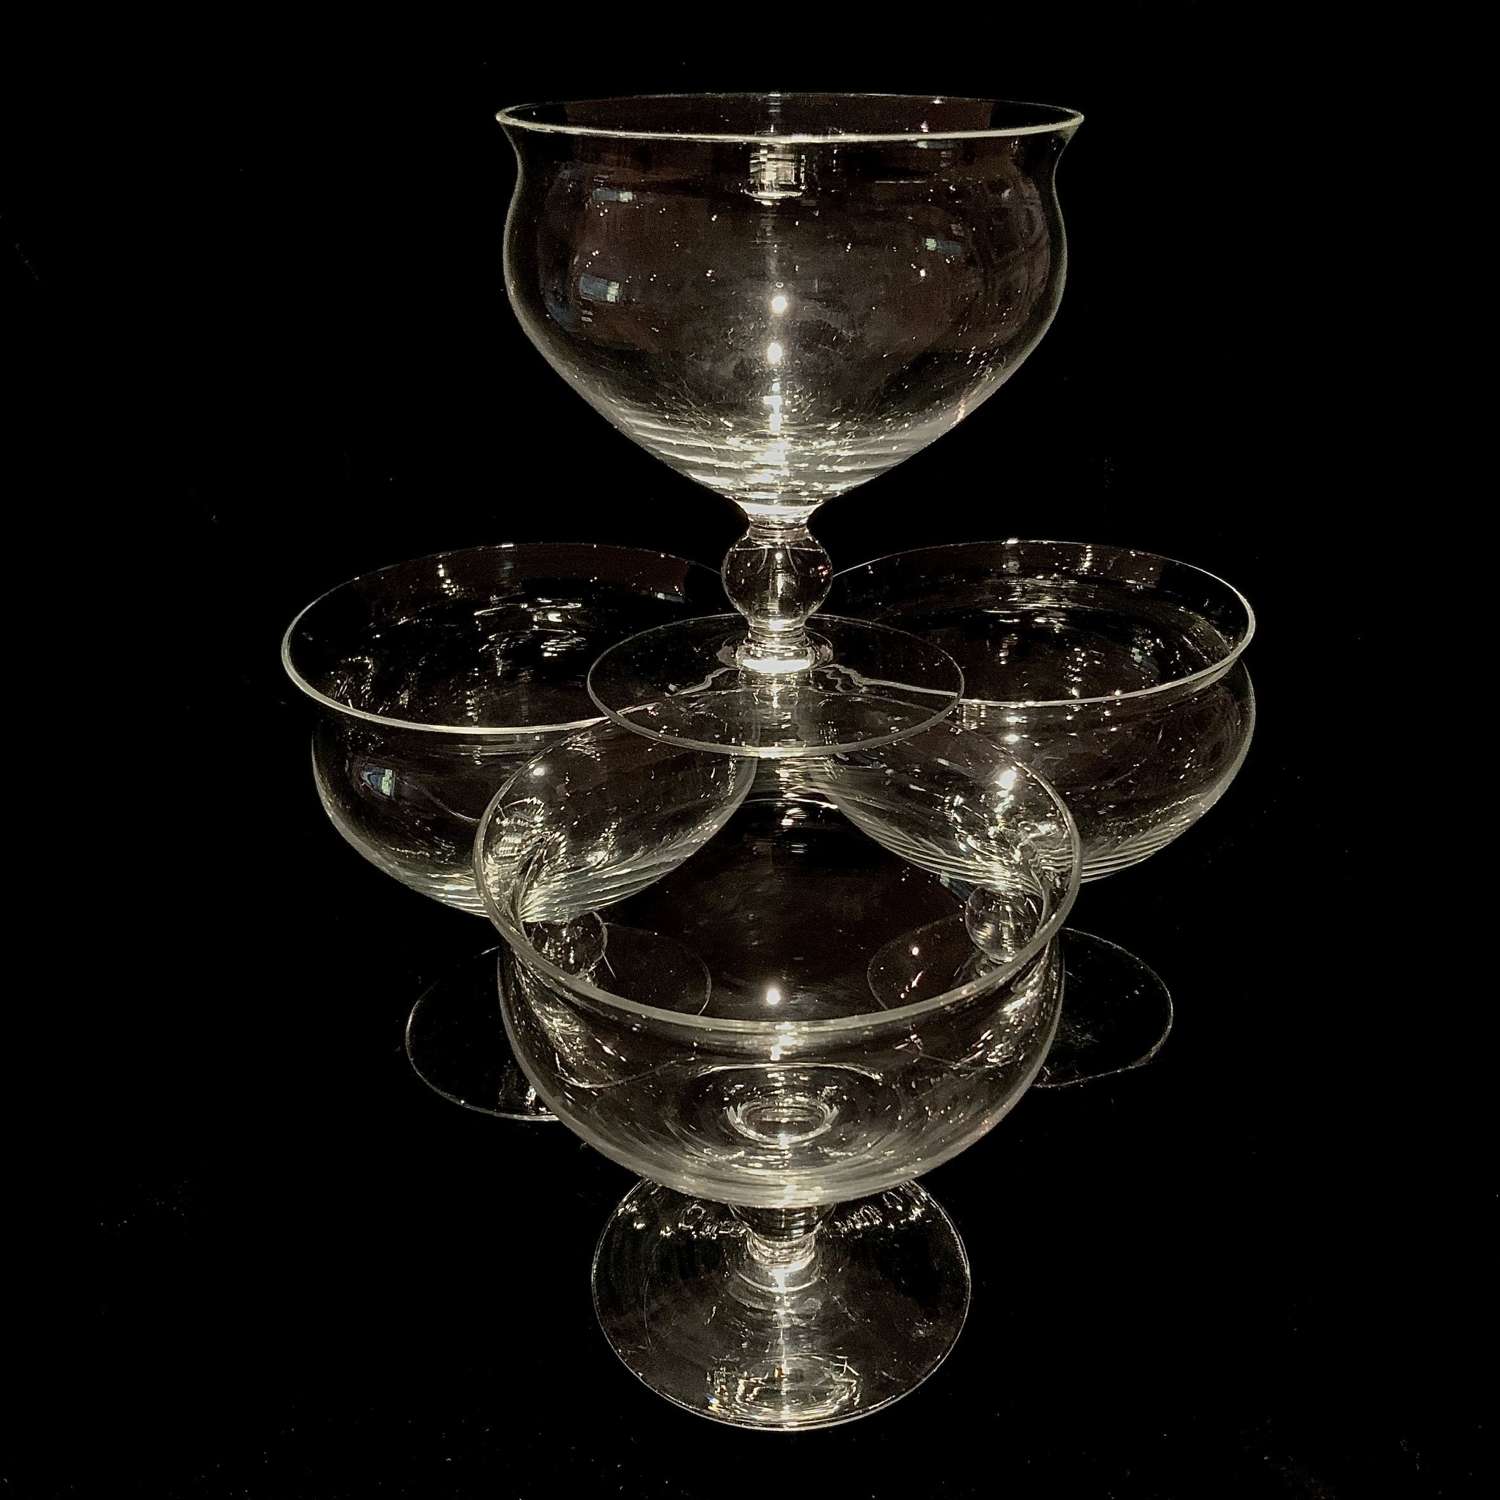 A Set of Four (4) Matching Glass Champagne, Coupes or Boats